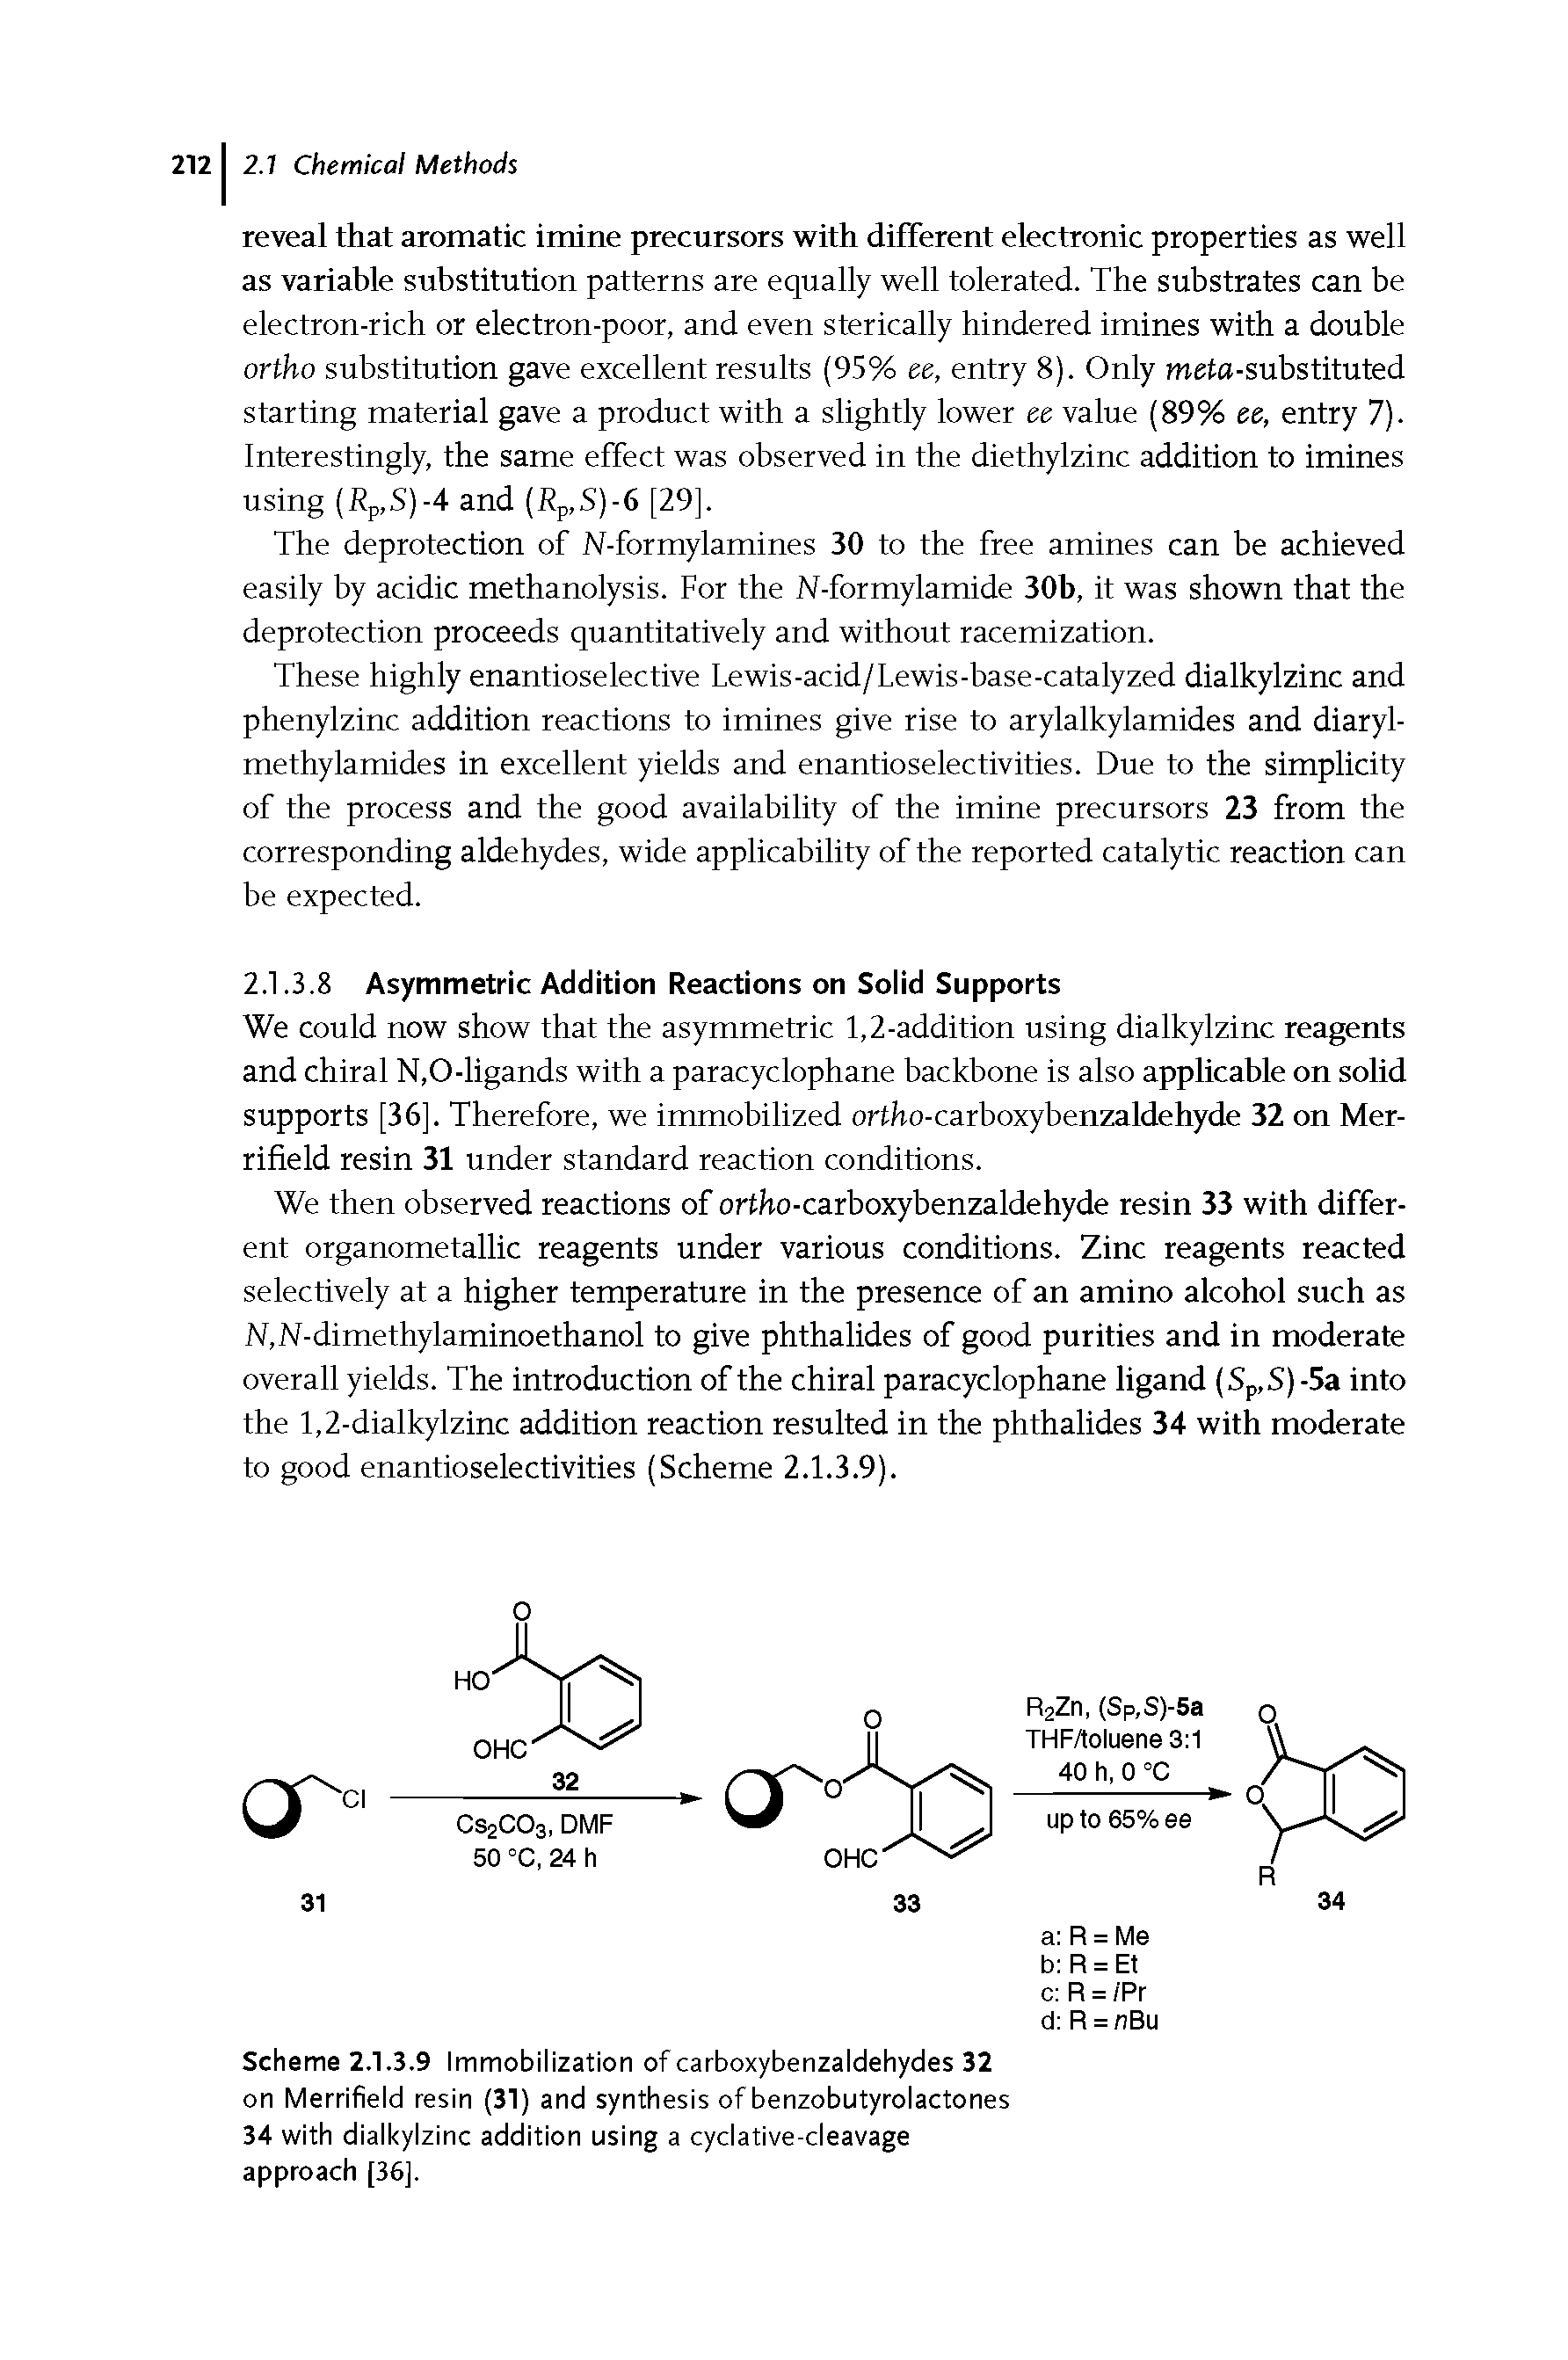 Scheme 2.1.3.9 Immobilization of carboxybenzaldehydes 32 on Merrifield resin (31) and synthesis of benzobutyrolactones 34 with dialkylzinc addition using a cyclative-cleavage approach [36].